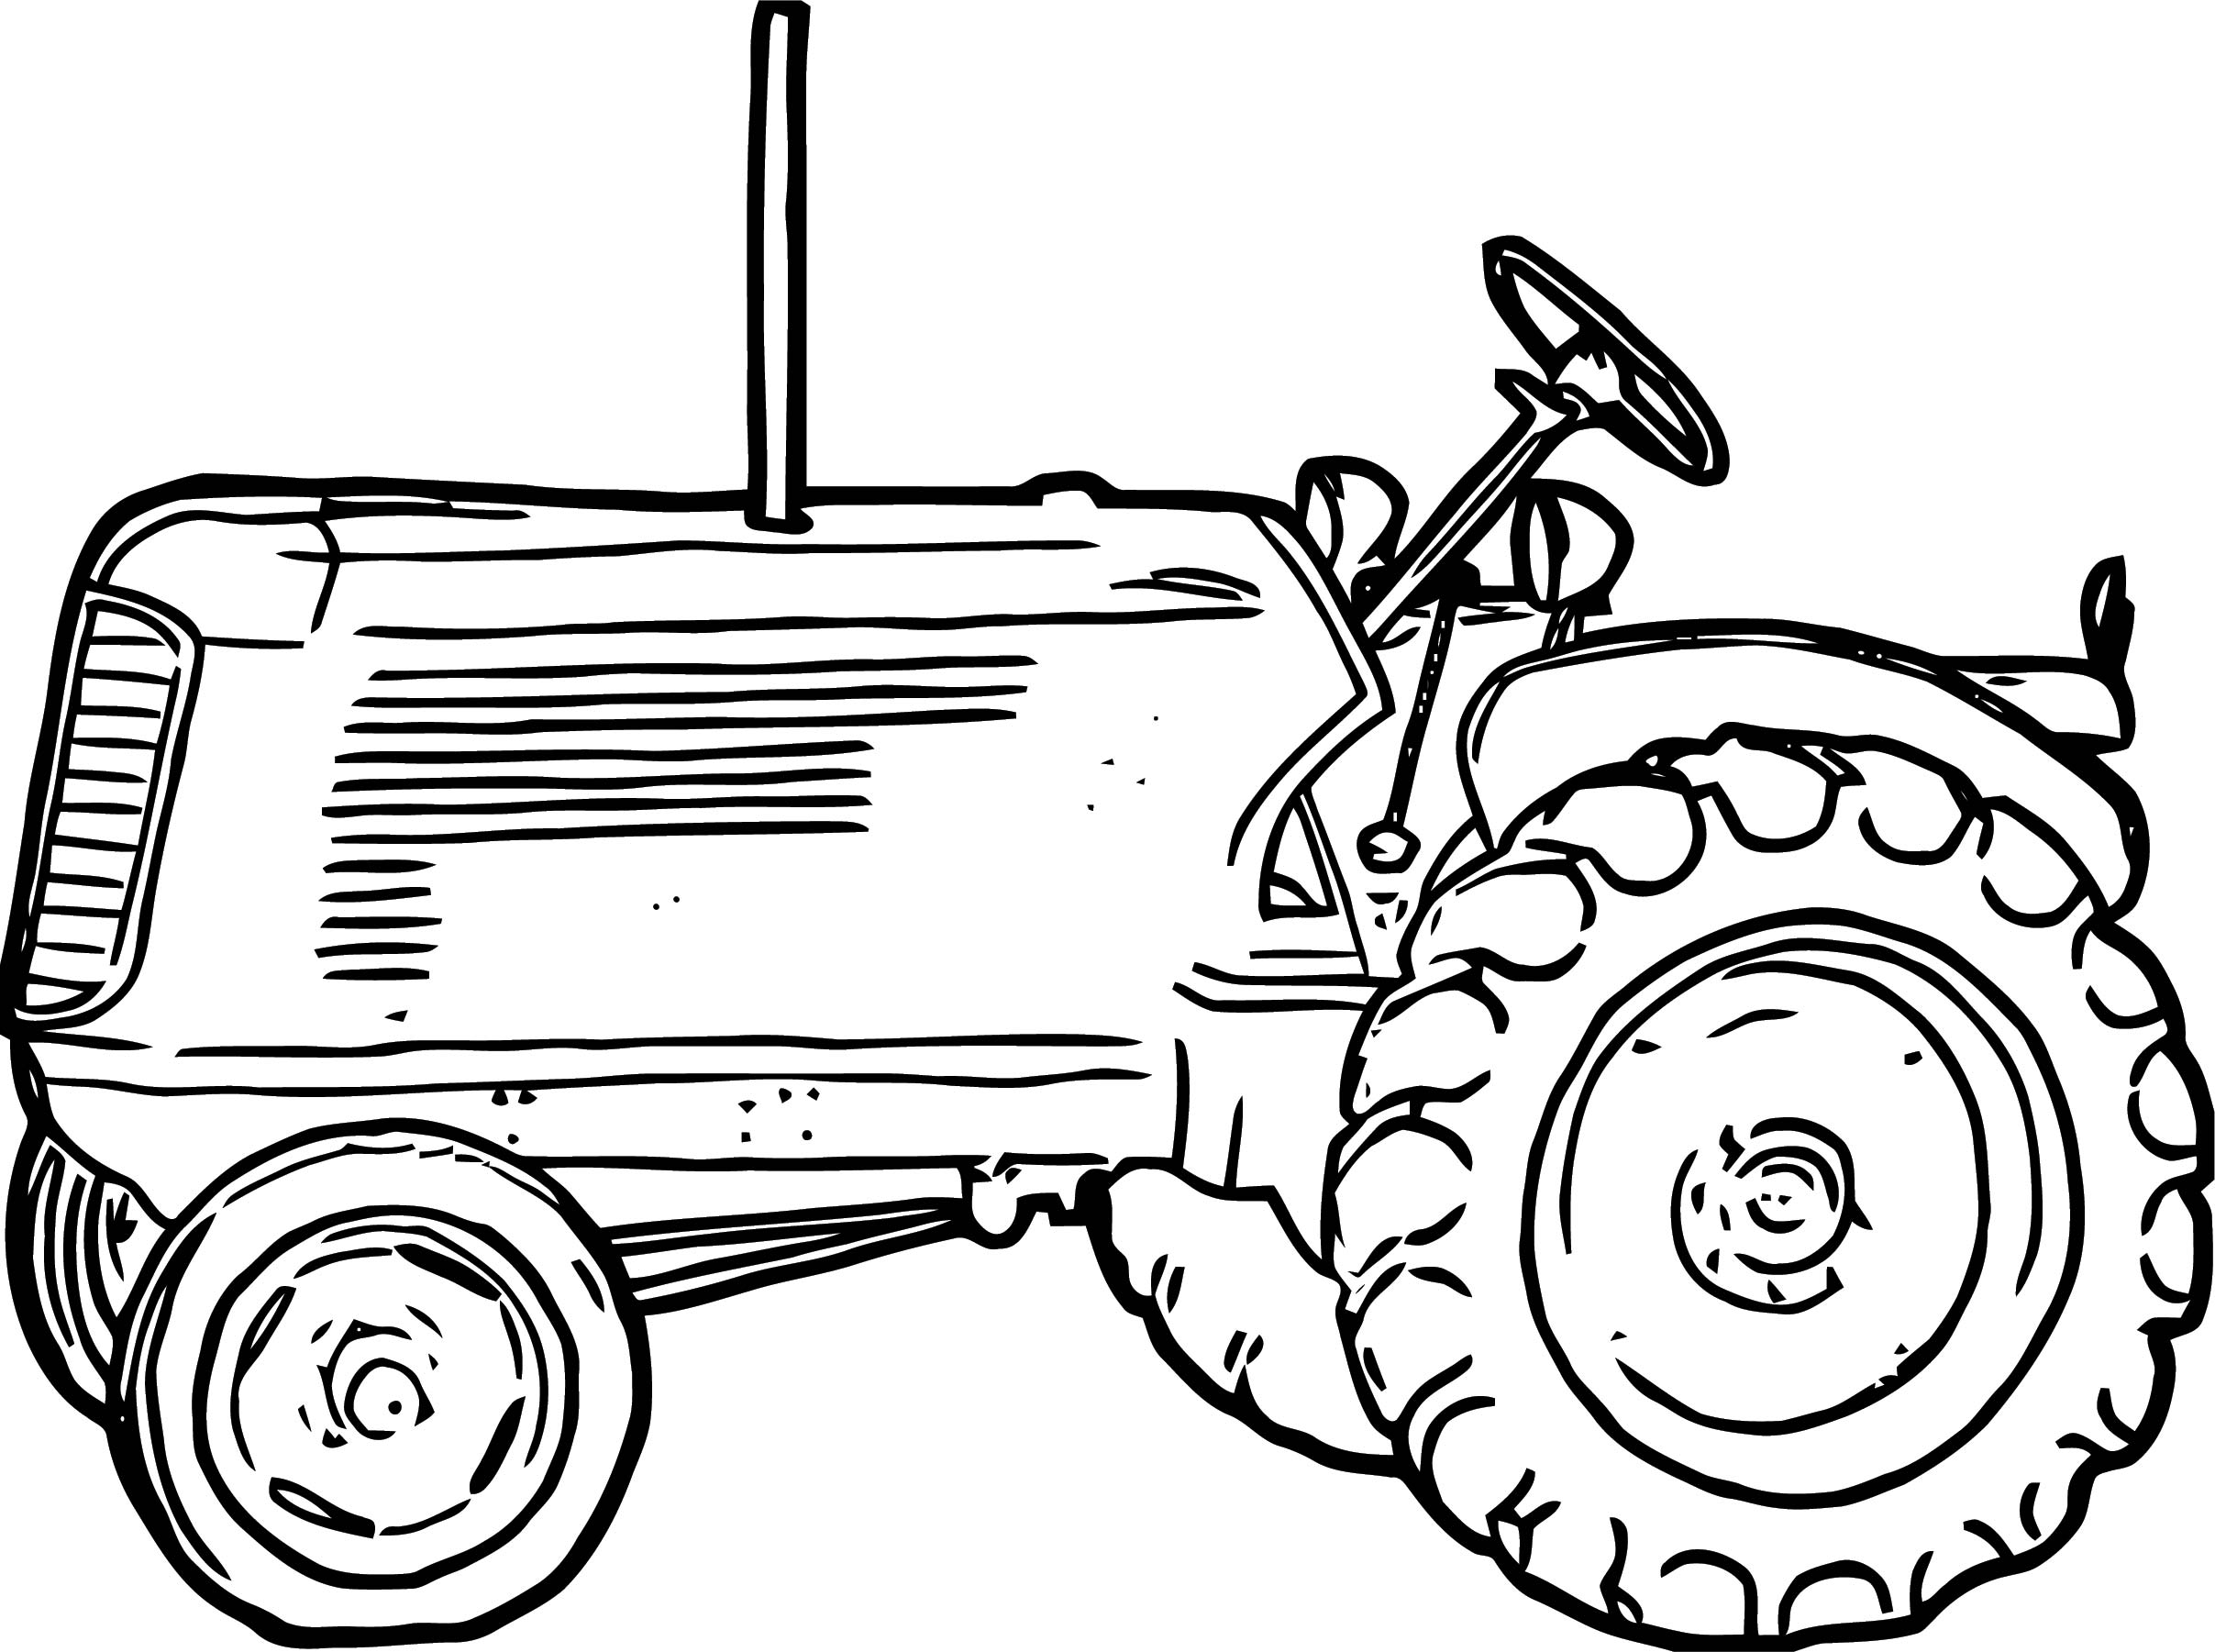 john-johnny-deere-tractor-coloring-page-wecoloringpage-52